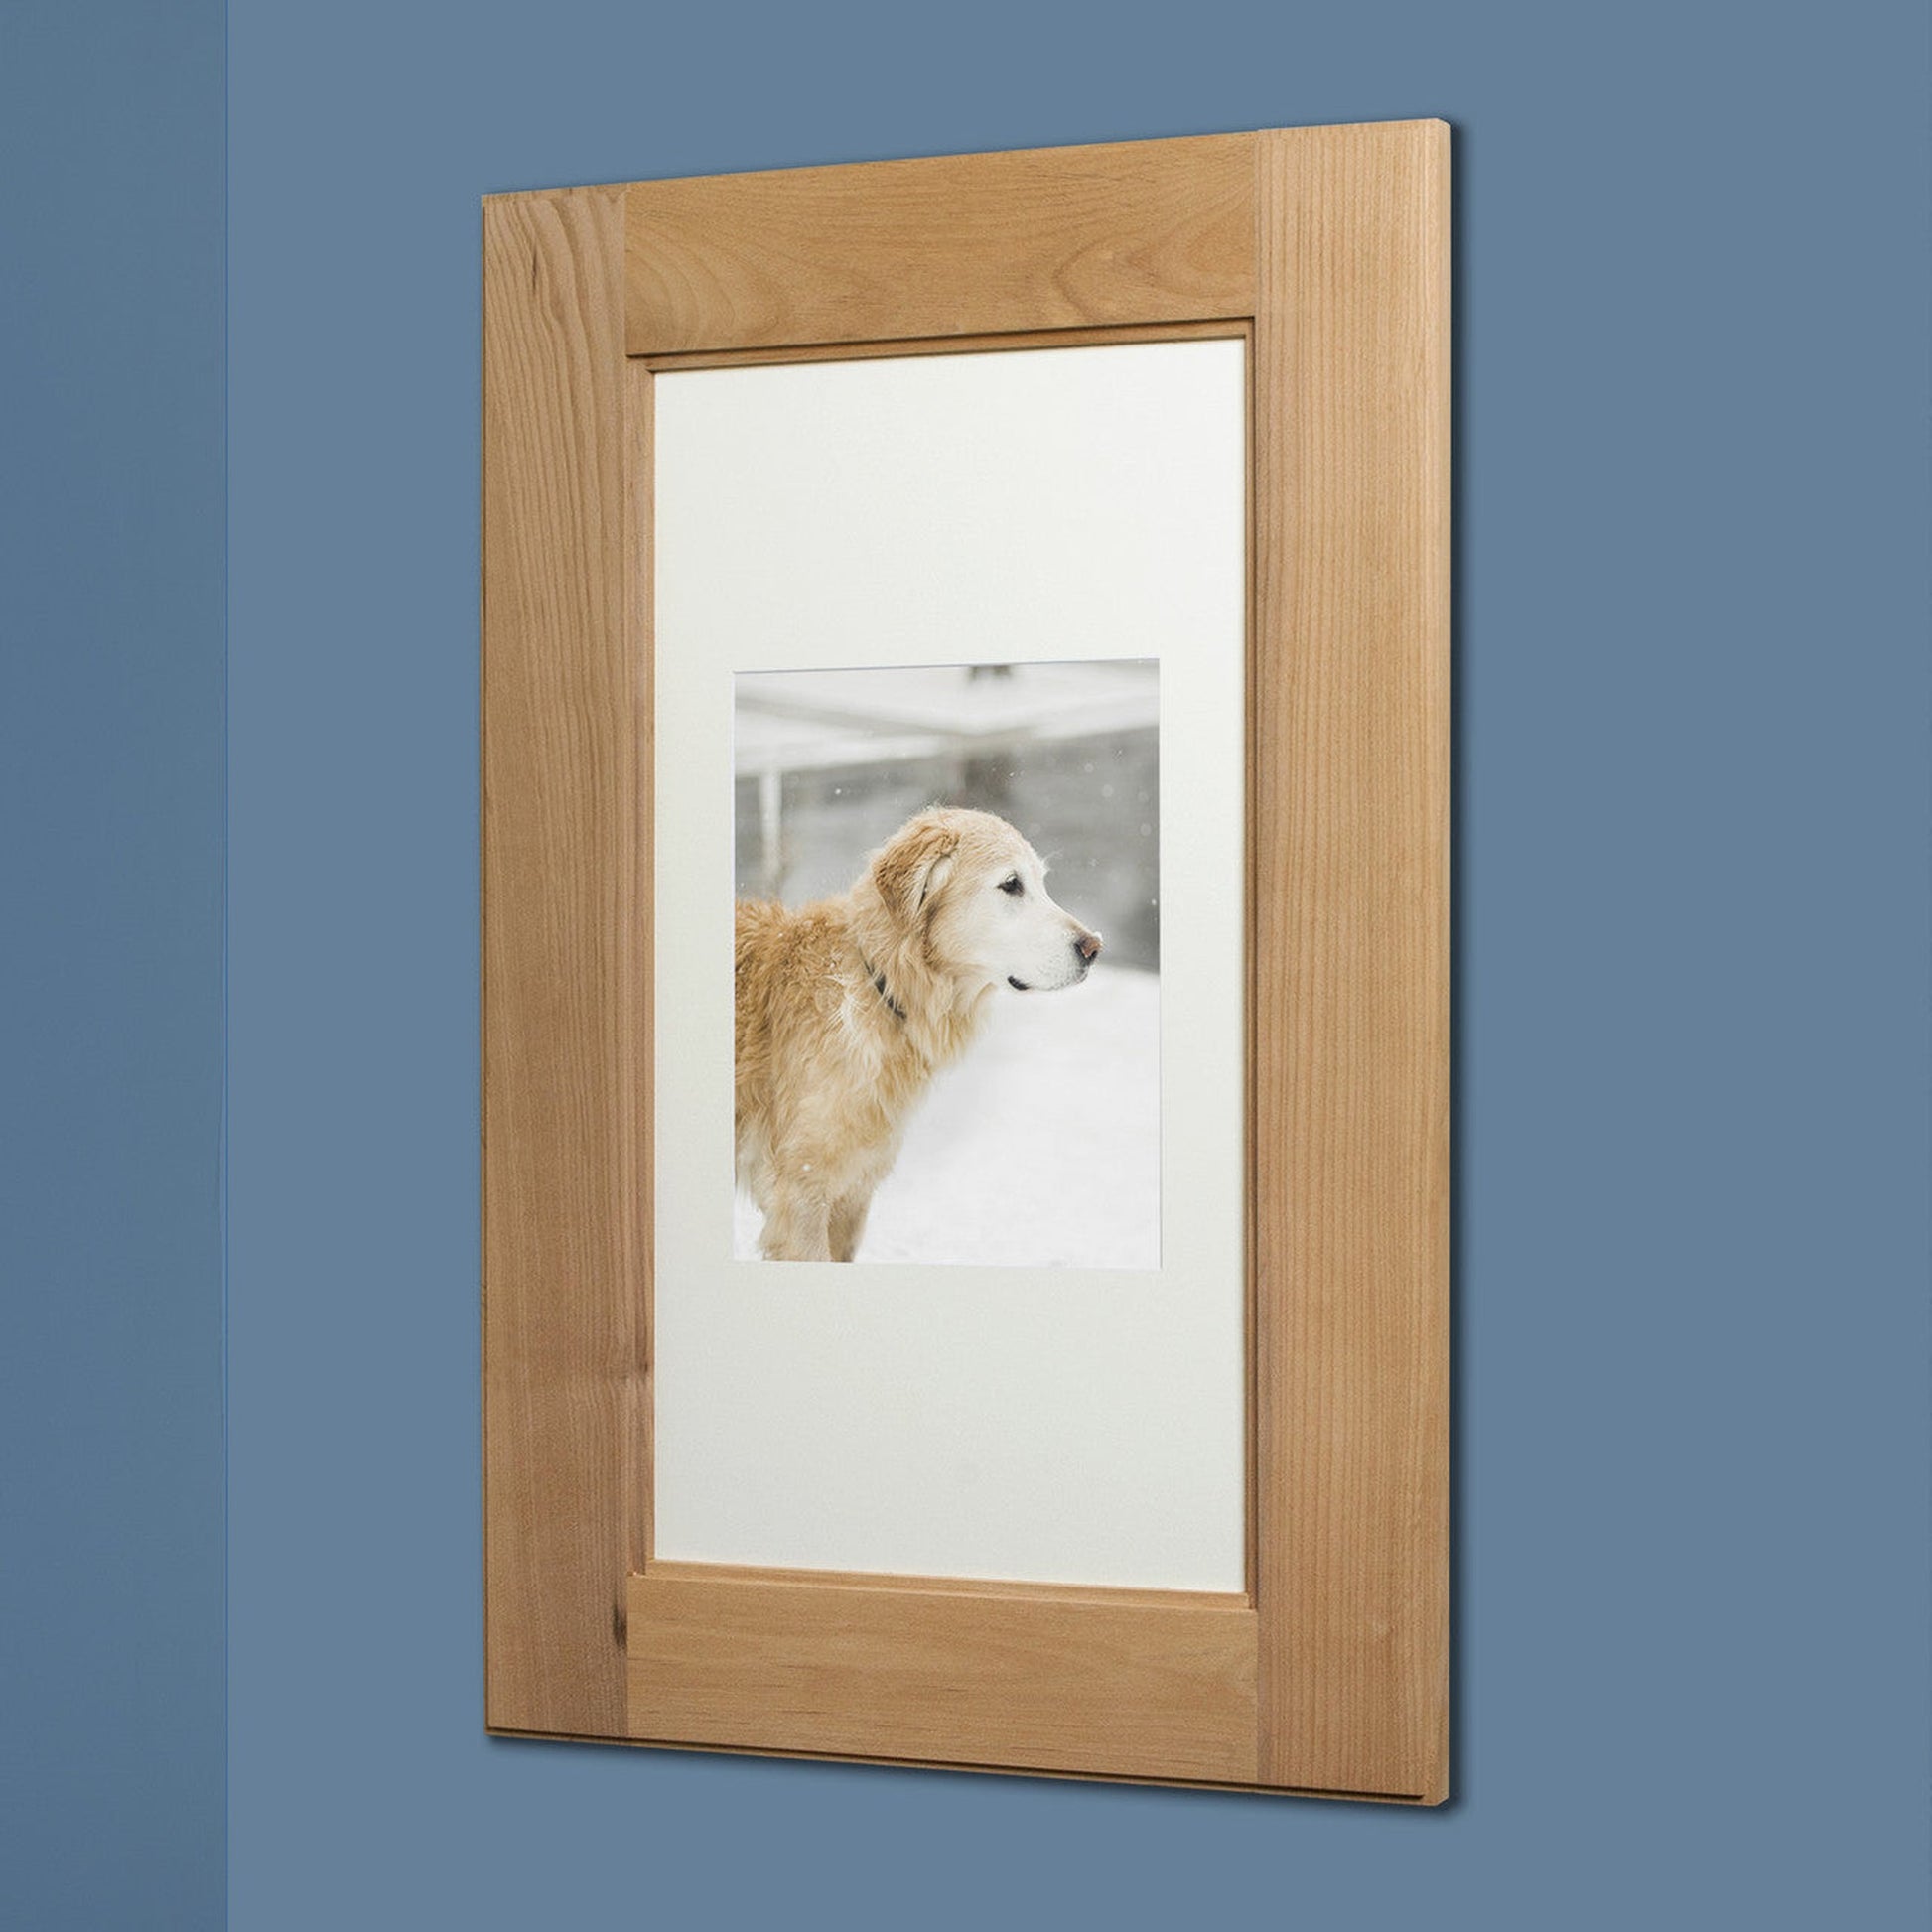 Fox Hollow Furnishings 14" x 24" Extra Large Unfinished Special 6" Depth White Interior Recessed Picture Frame Medicine Cabinet